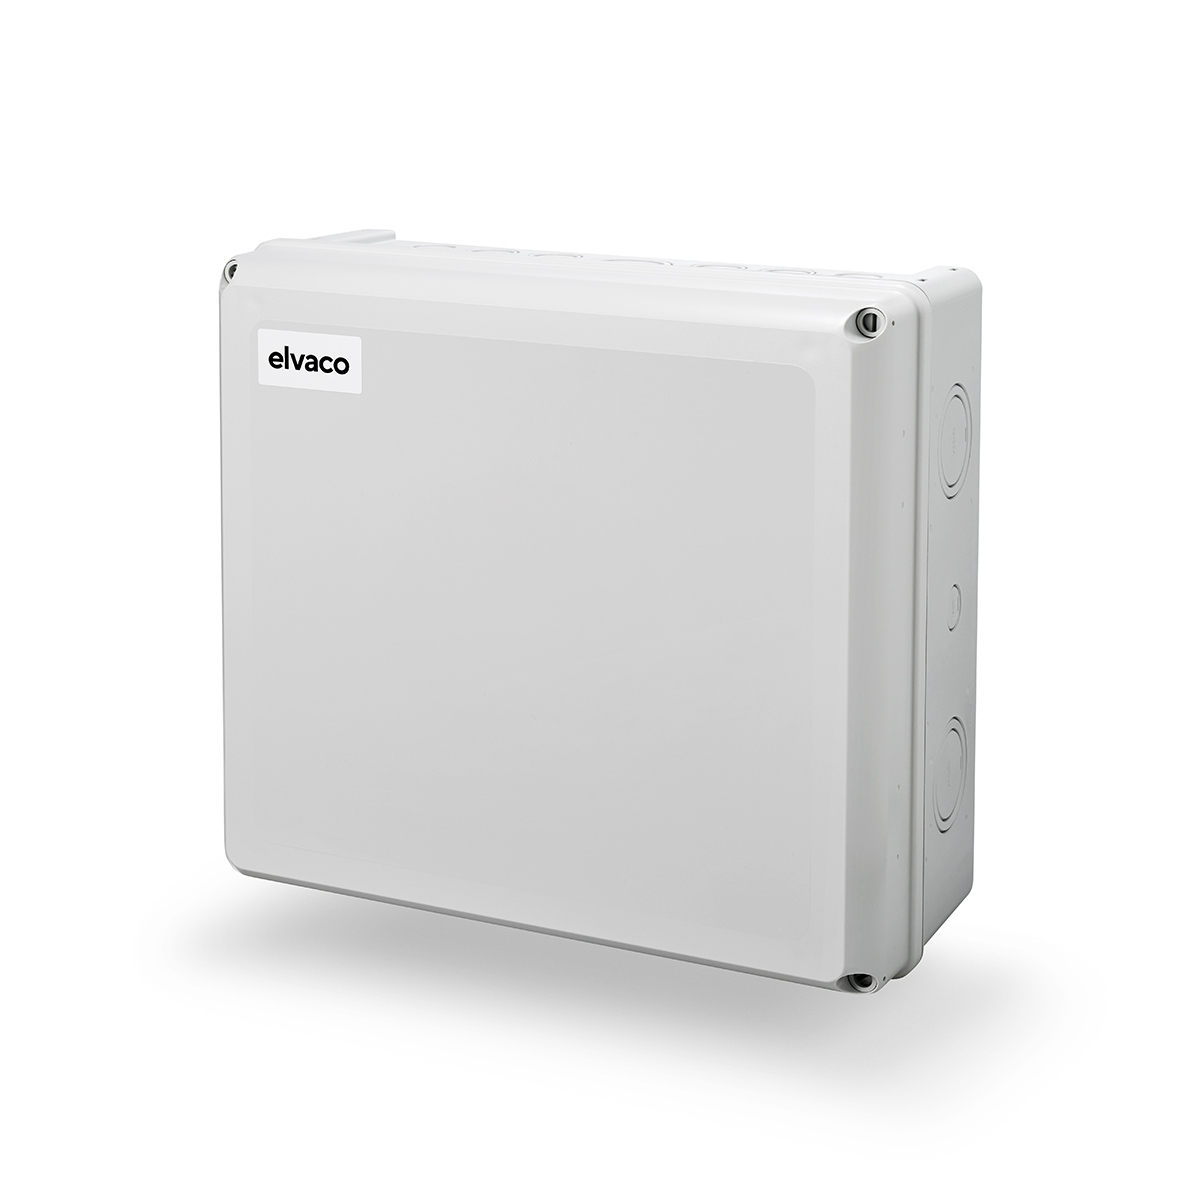 Elvaco CGc box now available with LTE communication 